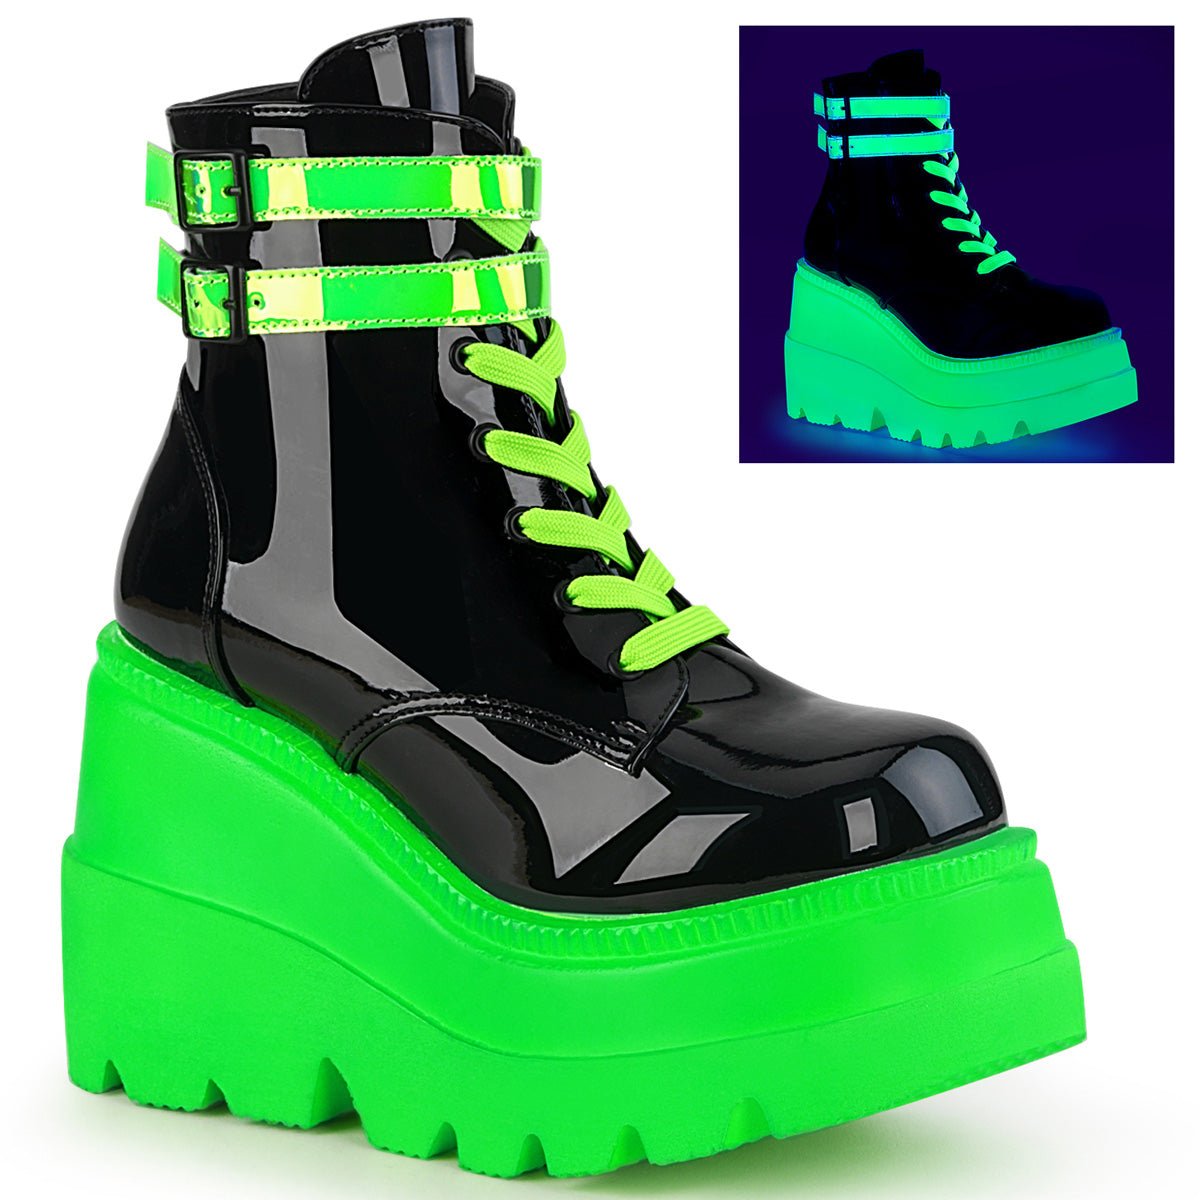 Too Fast | Demonia Shaker 52 | Black & Neon Green Patent Leather & Uv Neon Women's Ankle Boots